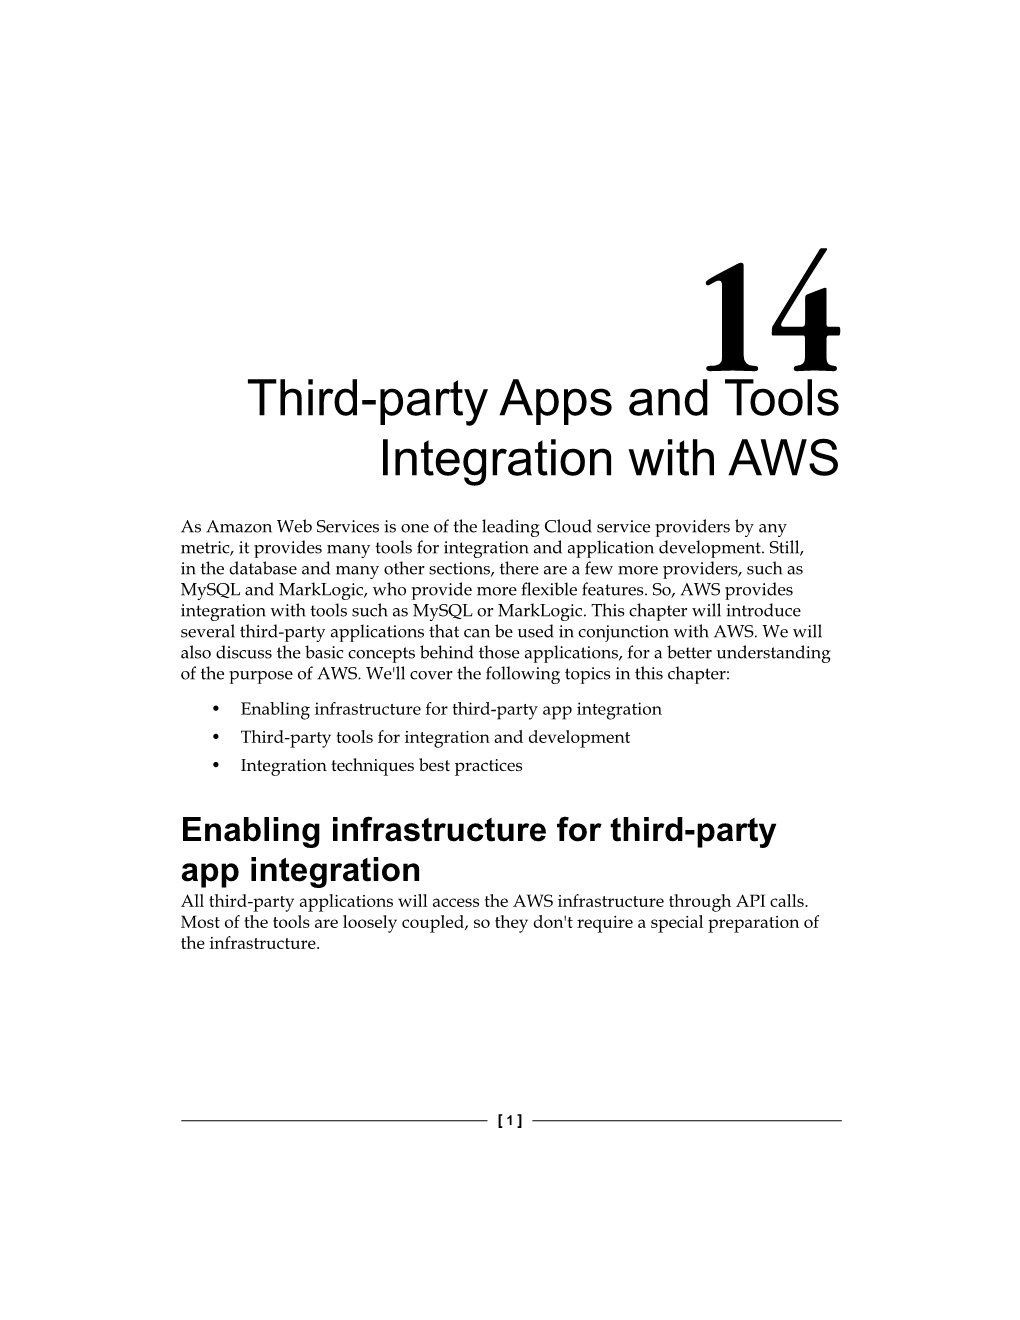 Third-Party Apps and Tools Integration with AWS